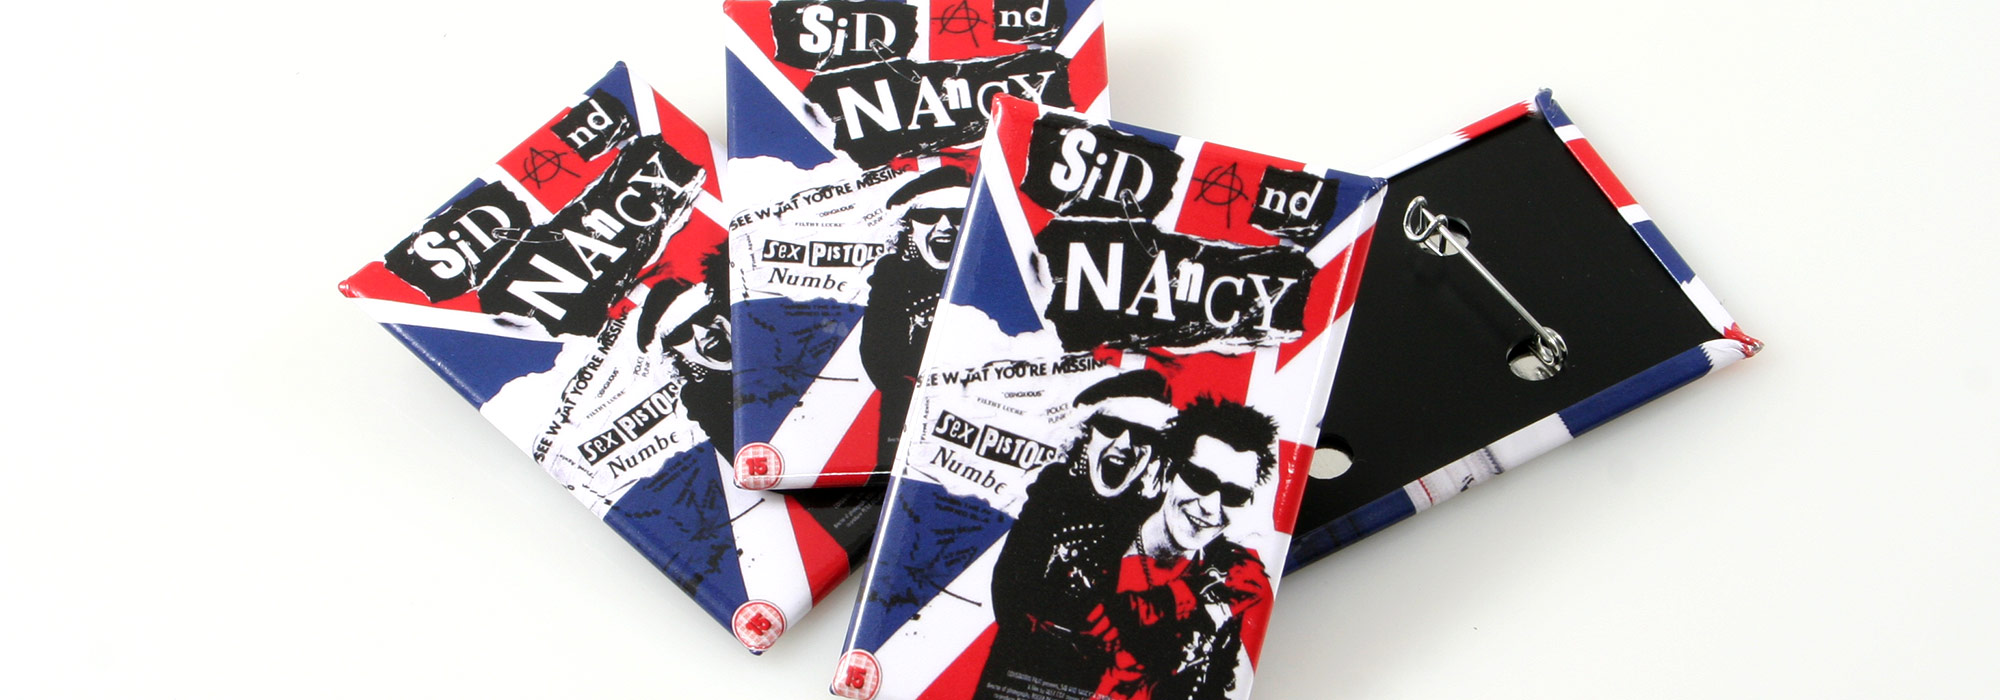 Rectangle Custom Buttons Sid and Nancy